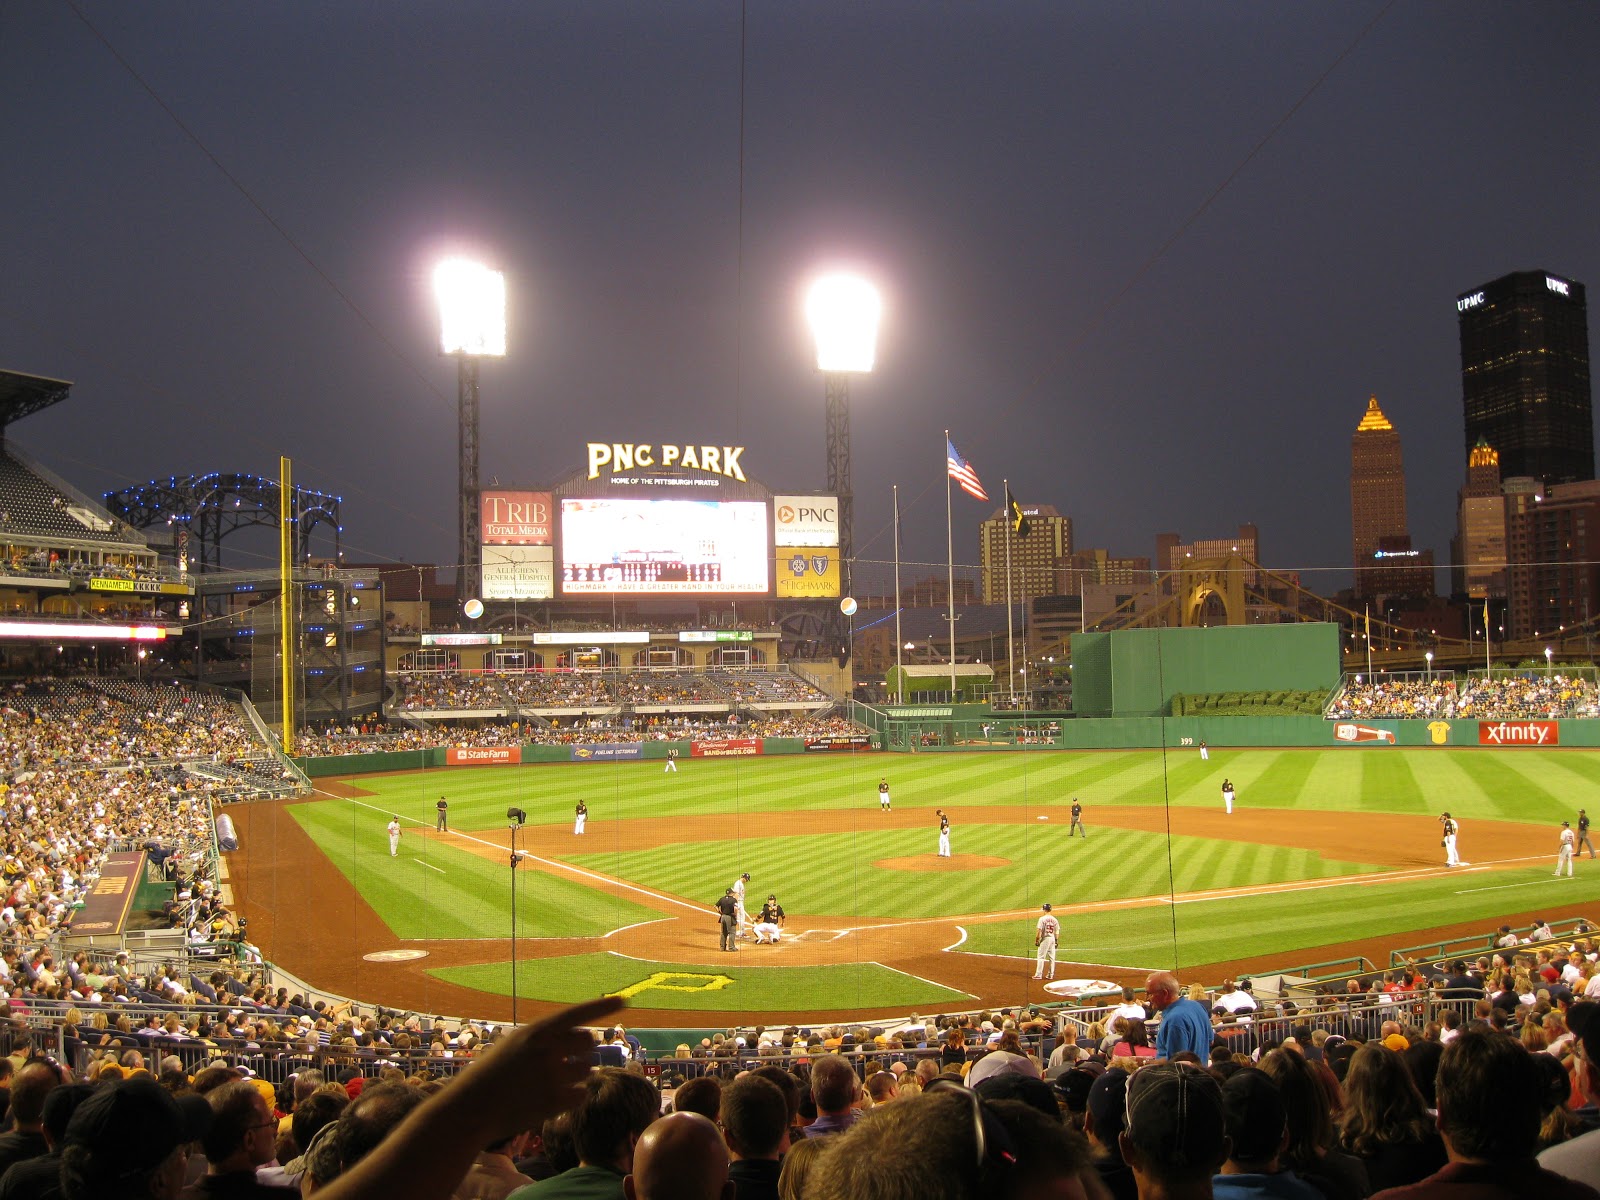 Getting Better Over Time: PNC Park at 15